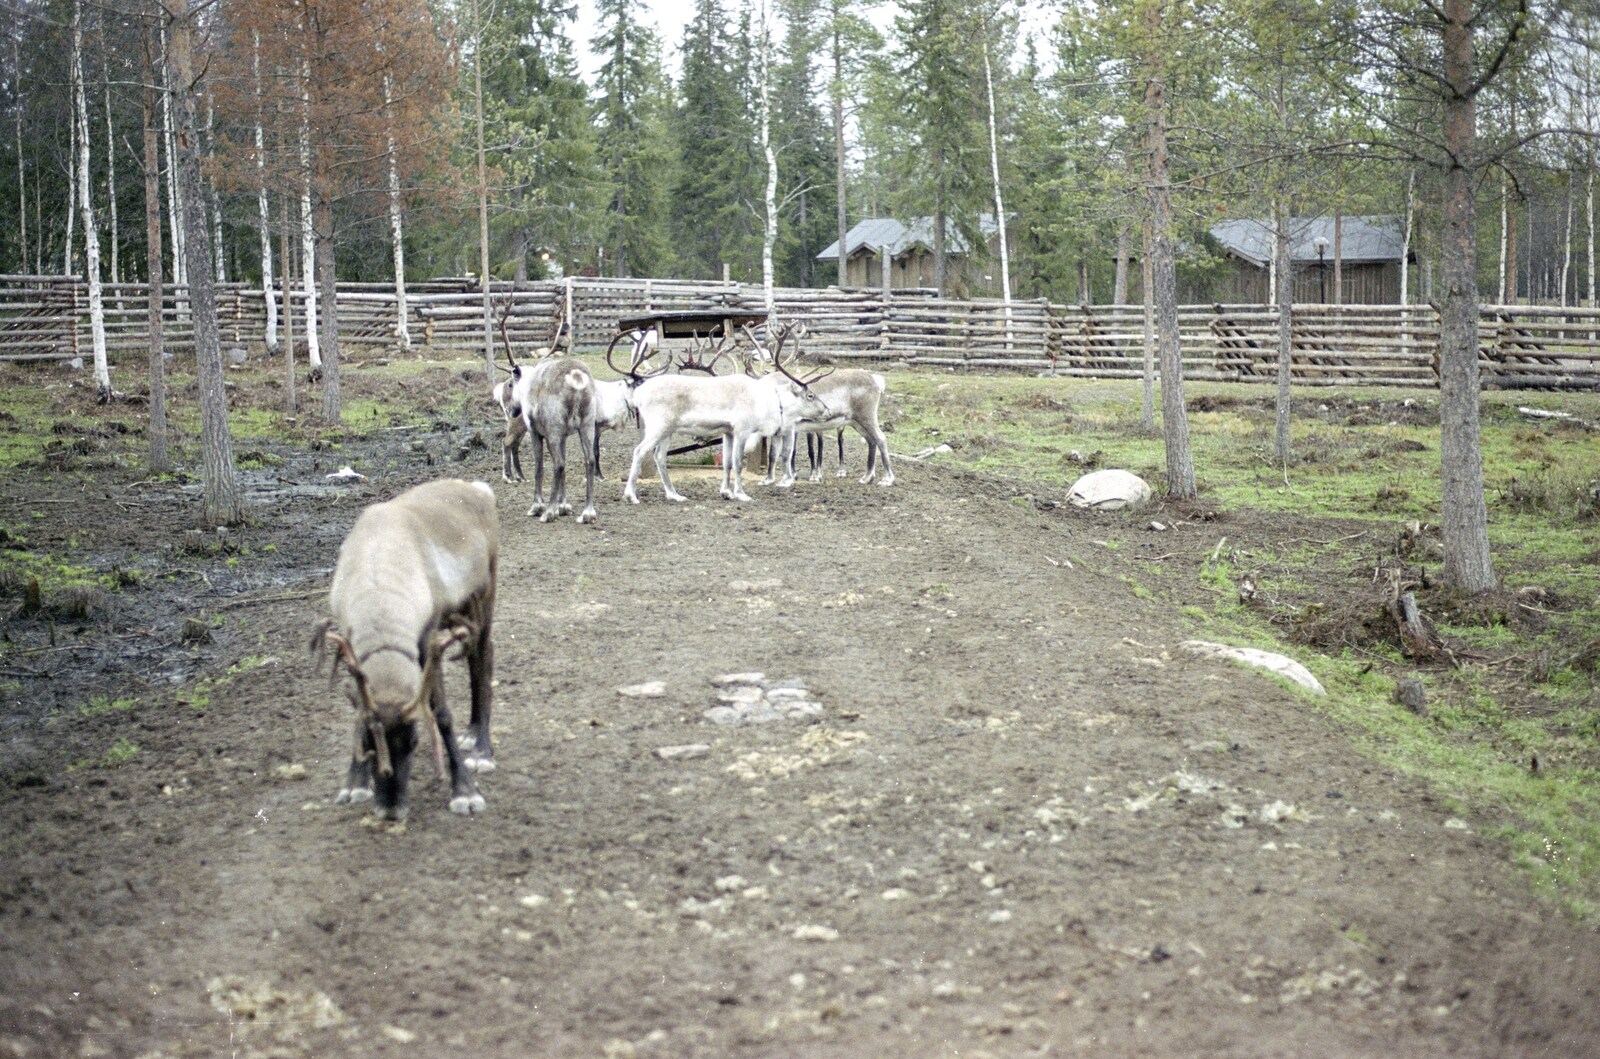 A reindeer paddock from A Trip to Rovaniemi and the Arctic Circle, Lapland, Finland - 28th November 1999